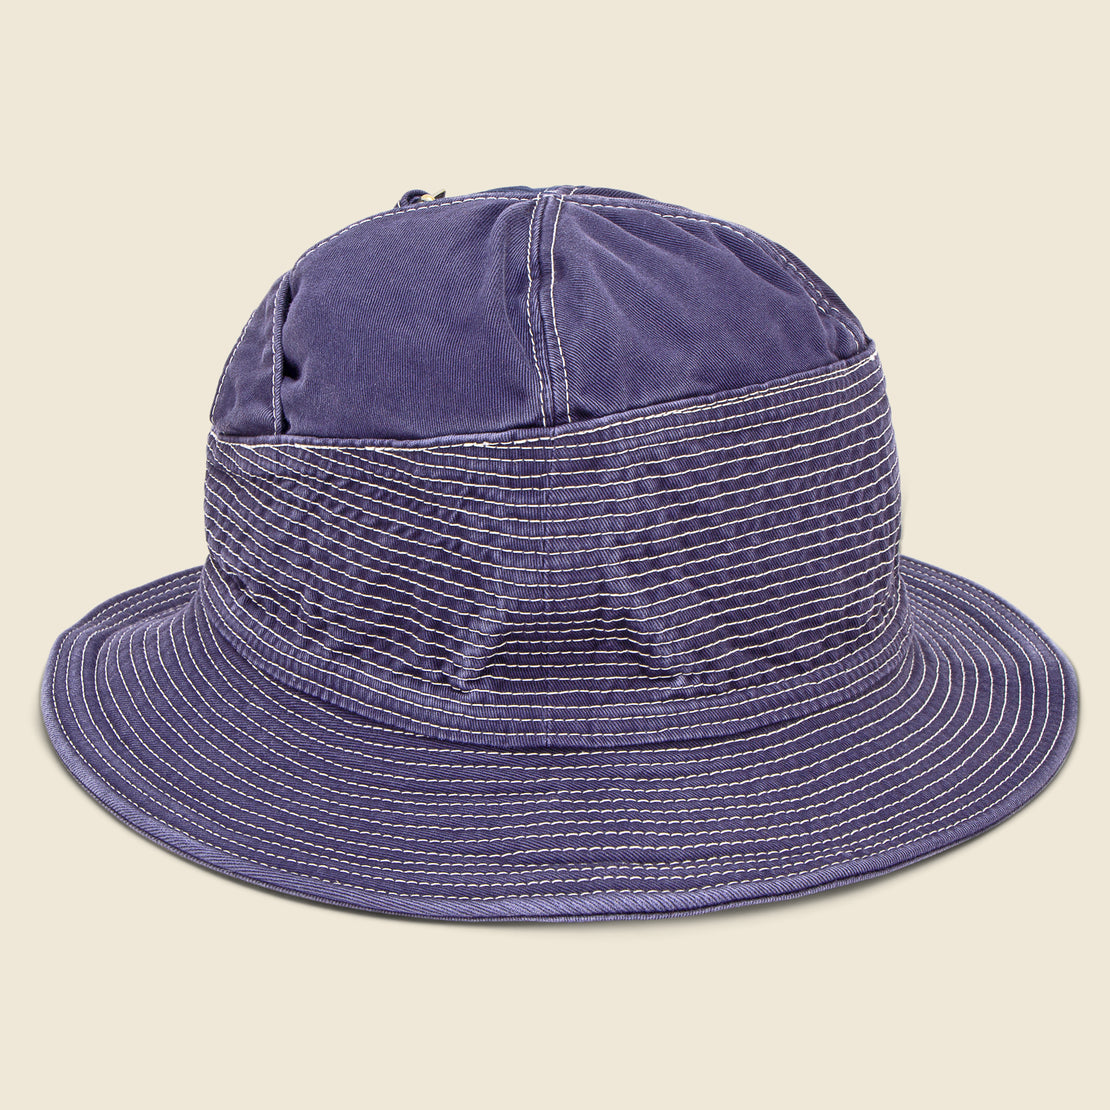 Kapital The Old Man and the Sea Bucket Hat - Navy